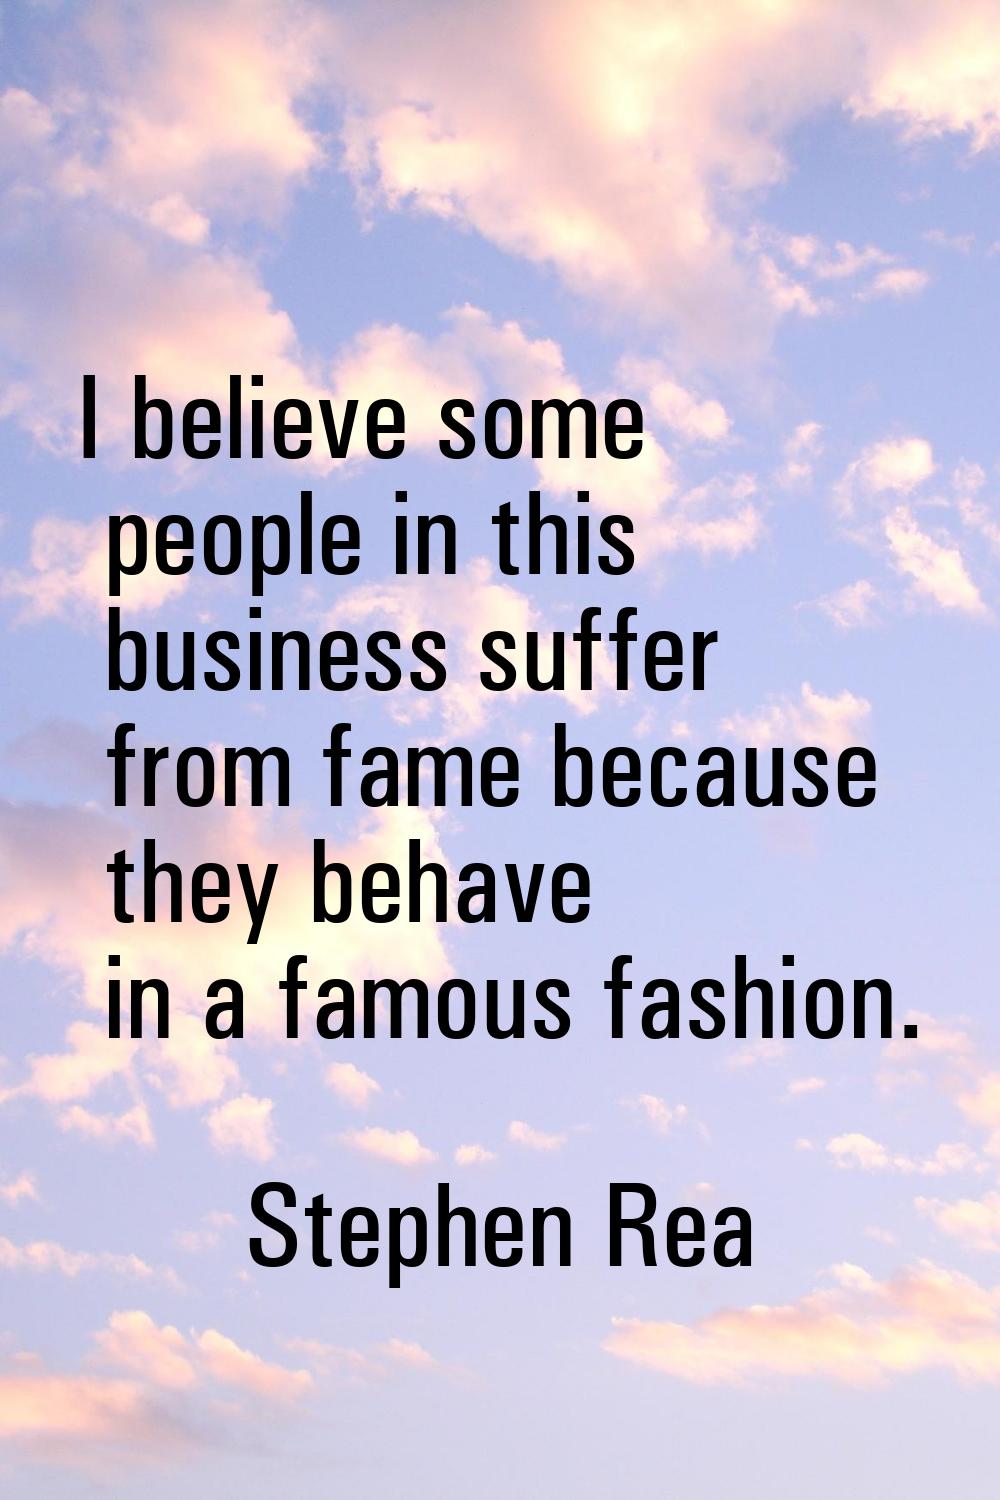 I believe some people in this business suffer from fame because they behave in a famous fashion.